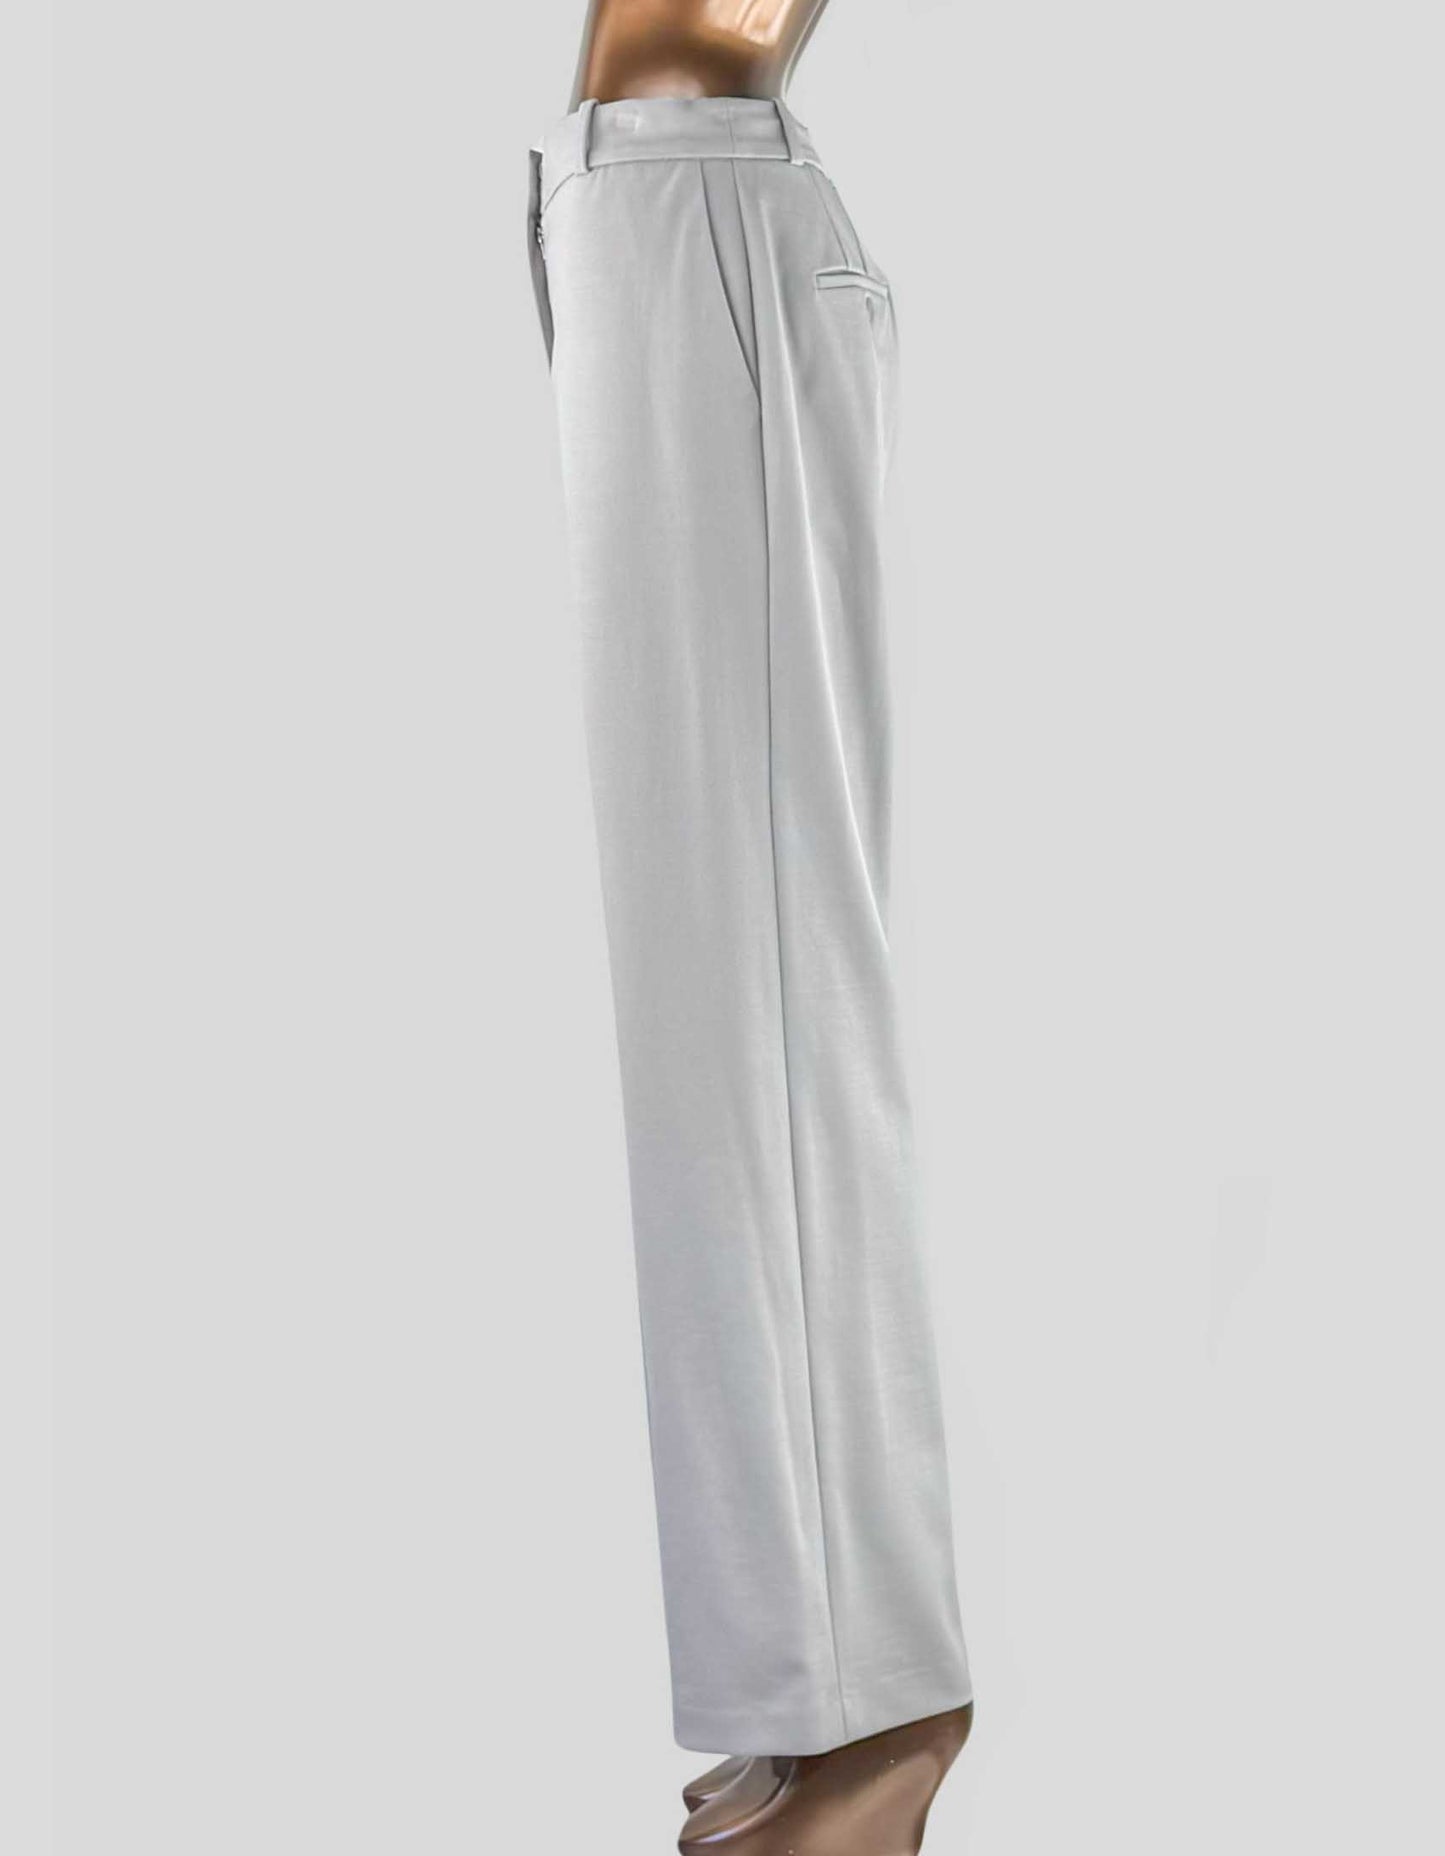 BABATON high-waisted trousers w/ Tags - 6 US